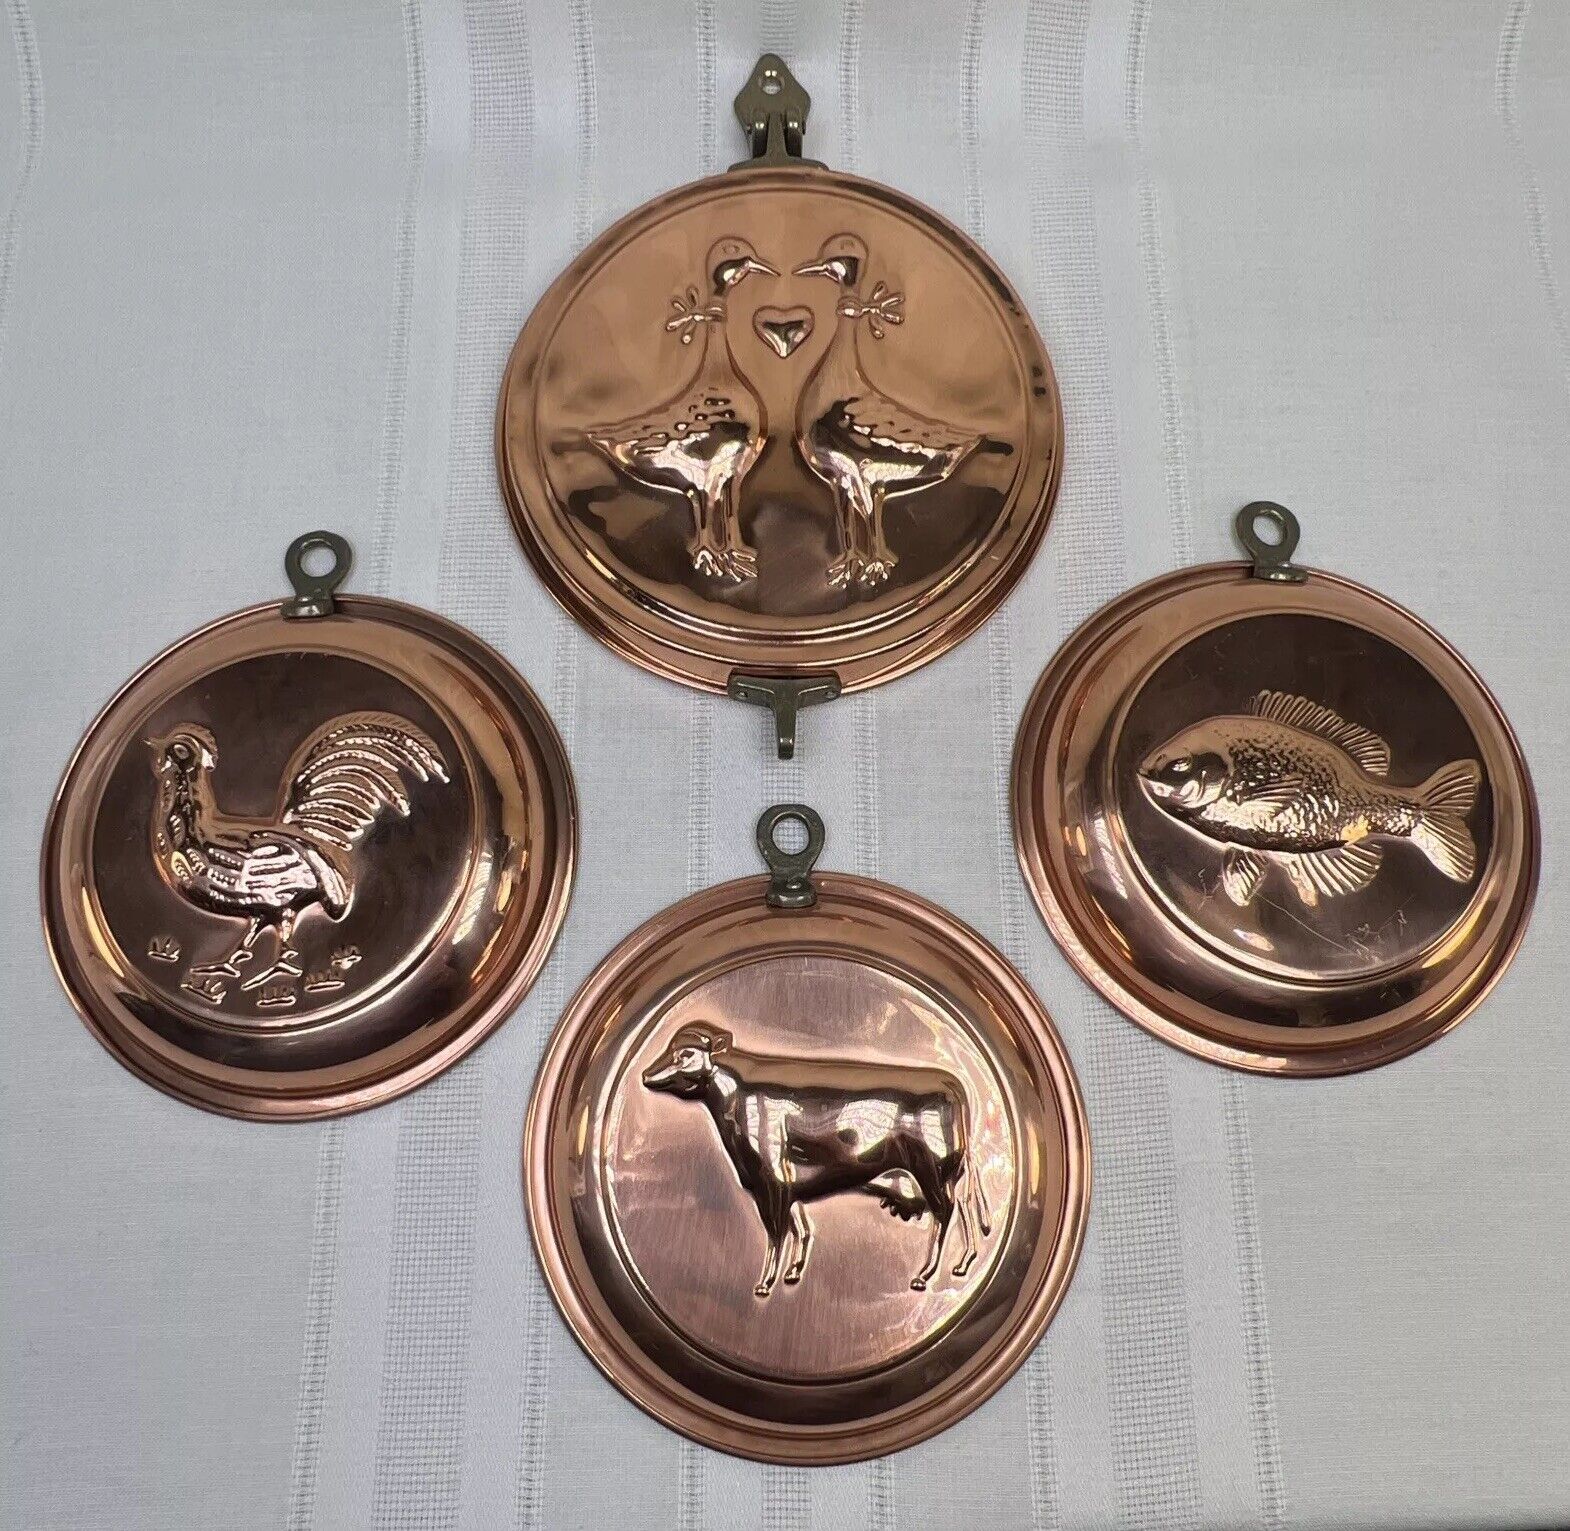 x4 Vintage COPPER Clad Tin Wall Key Holder Hanging Mold GEESE COW ROOSTER FISH